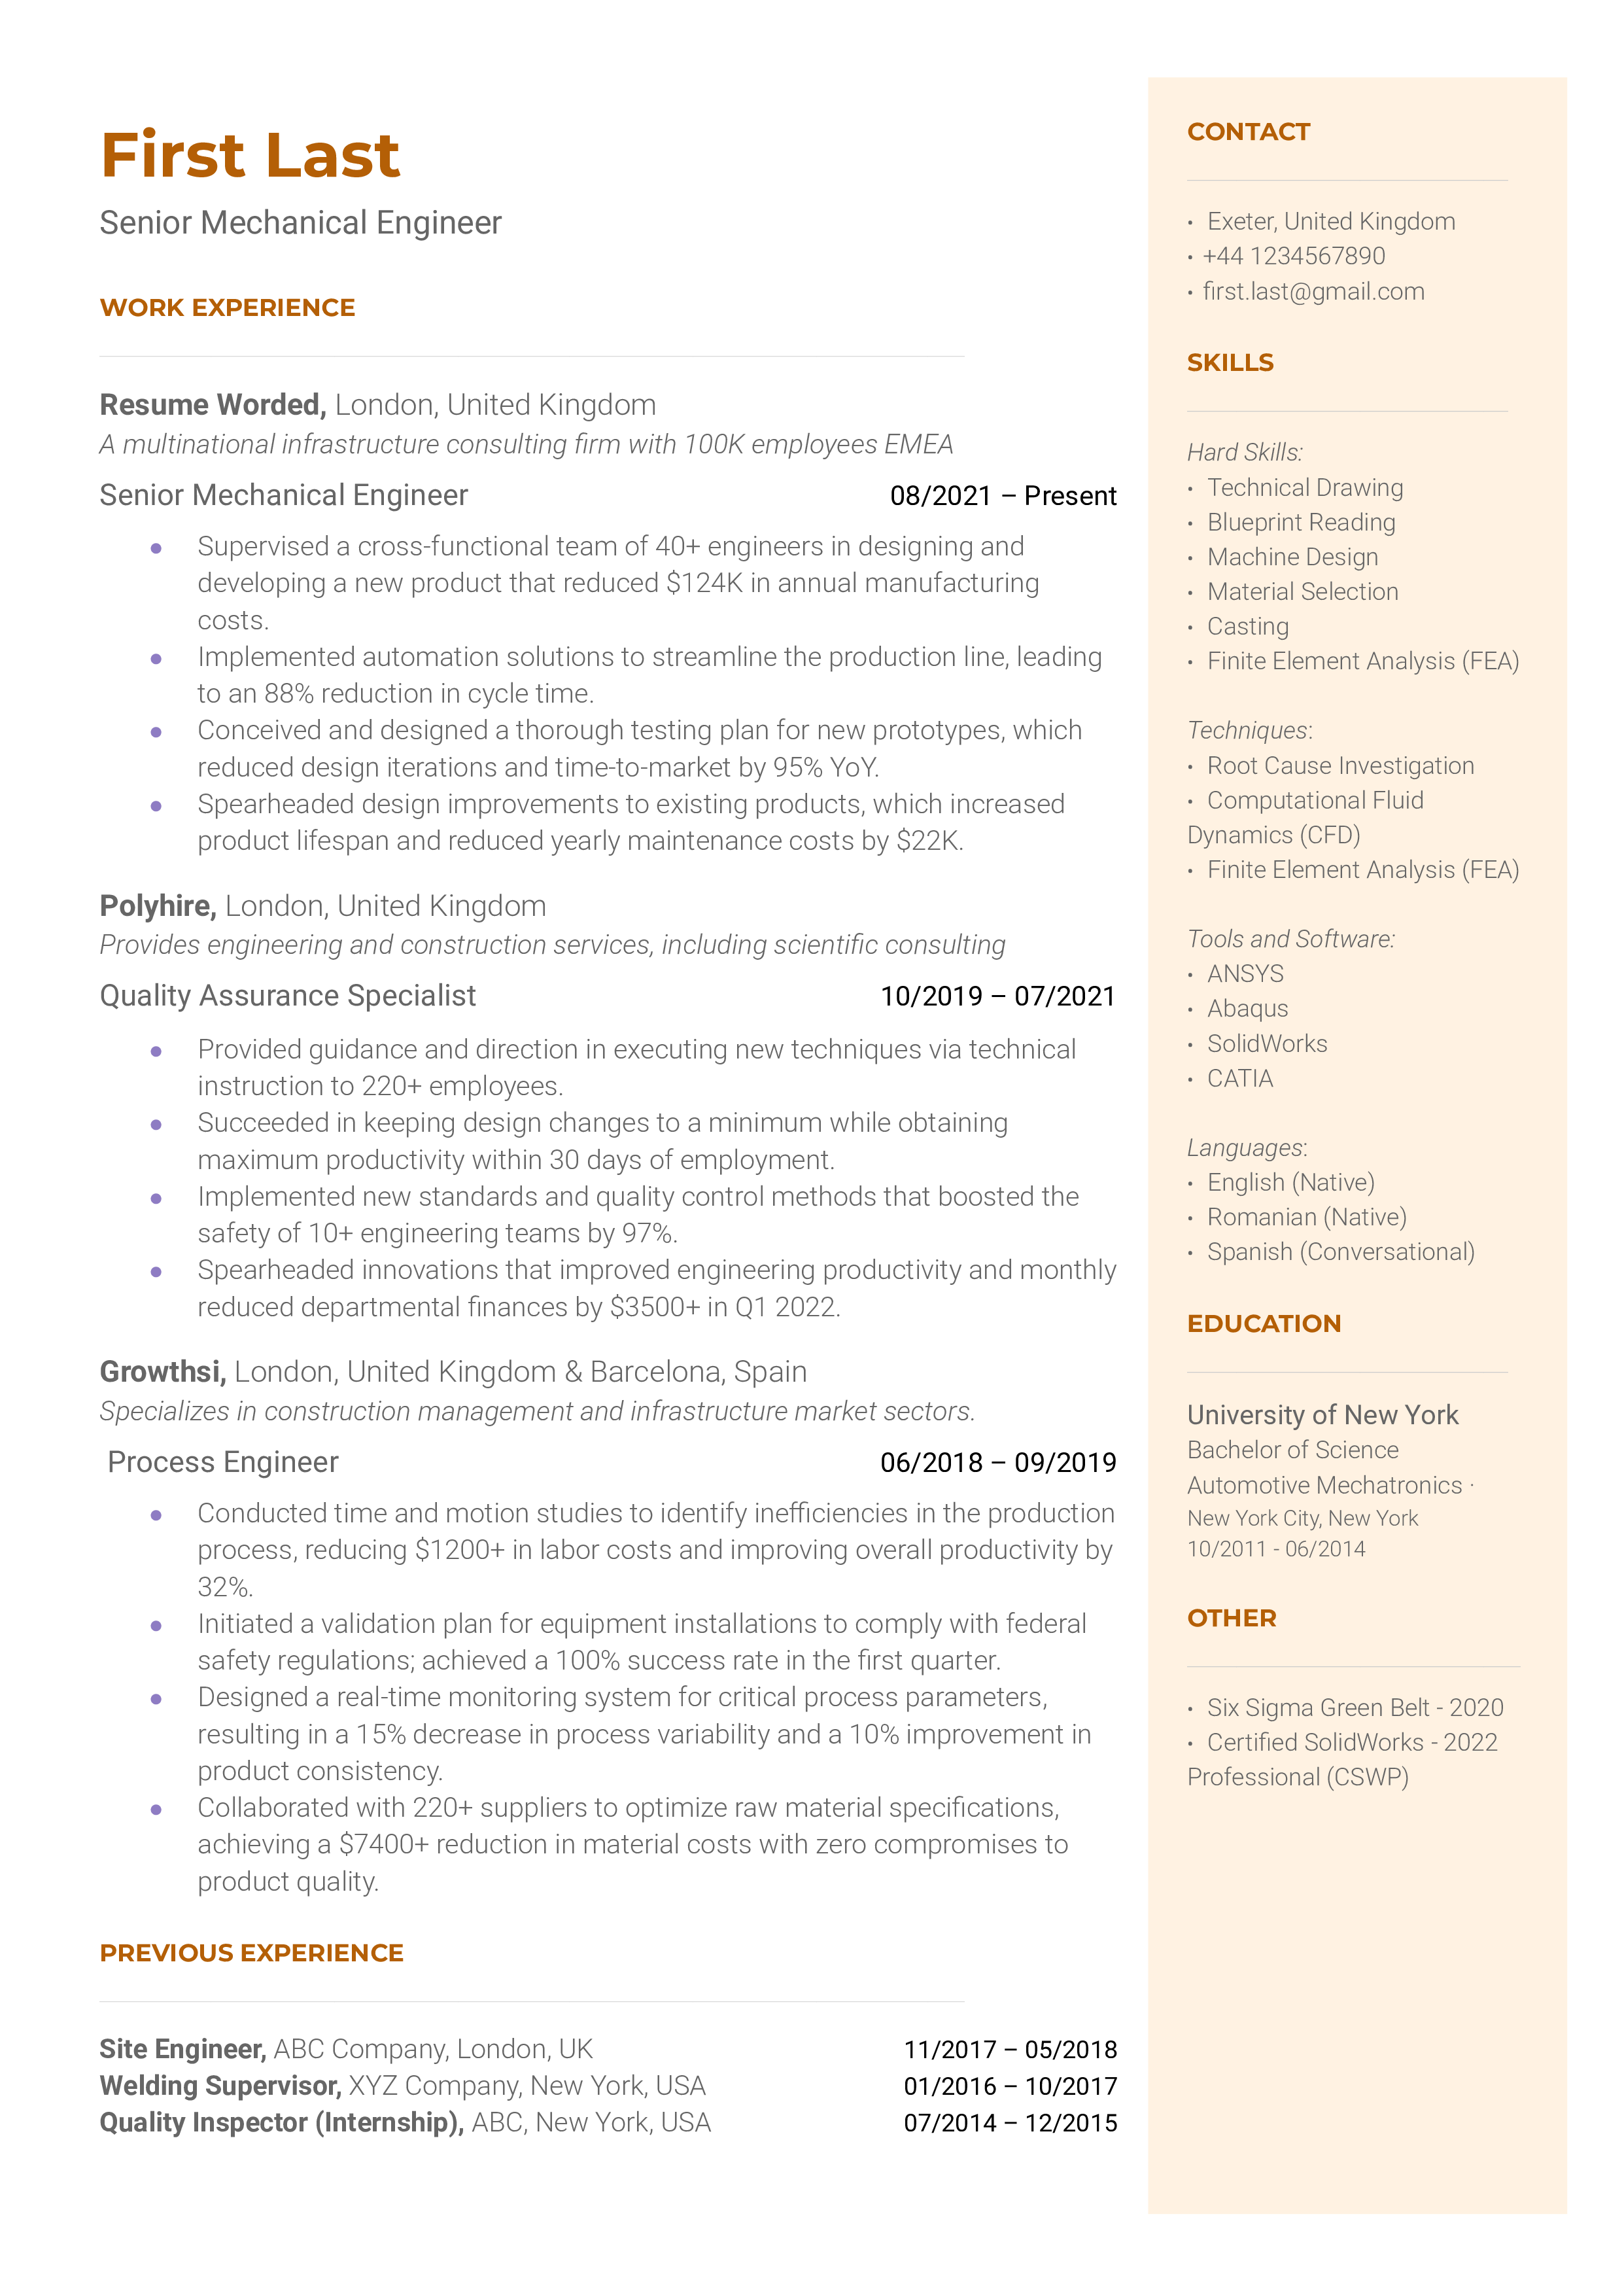 A CV showcasing project management and Python libraries expertise.